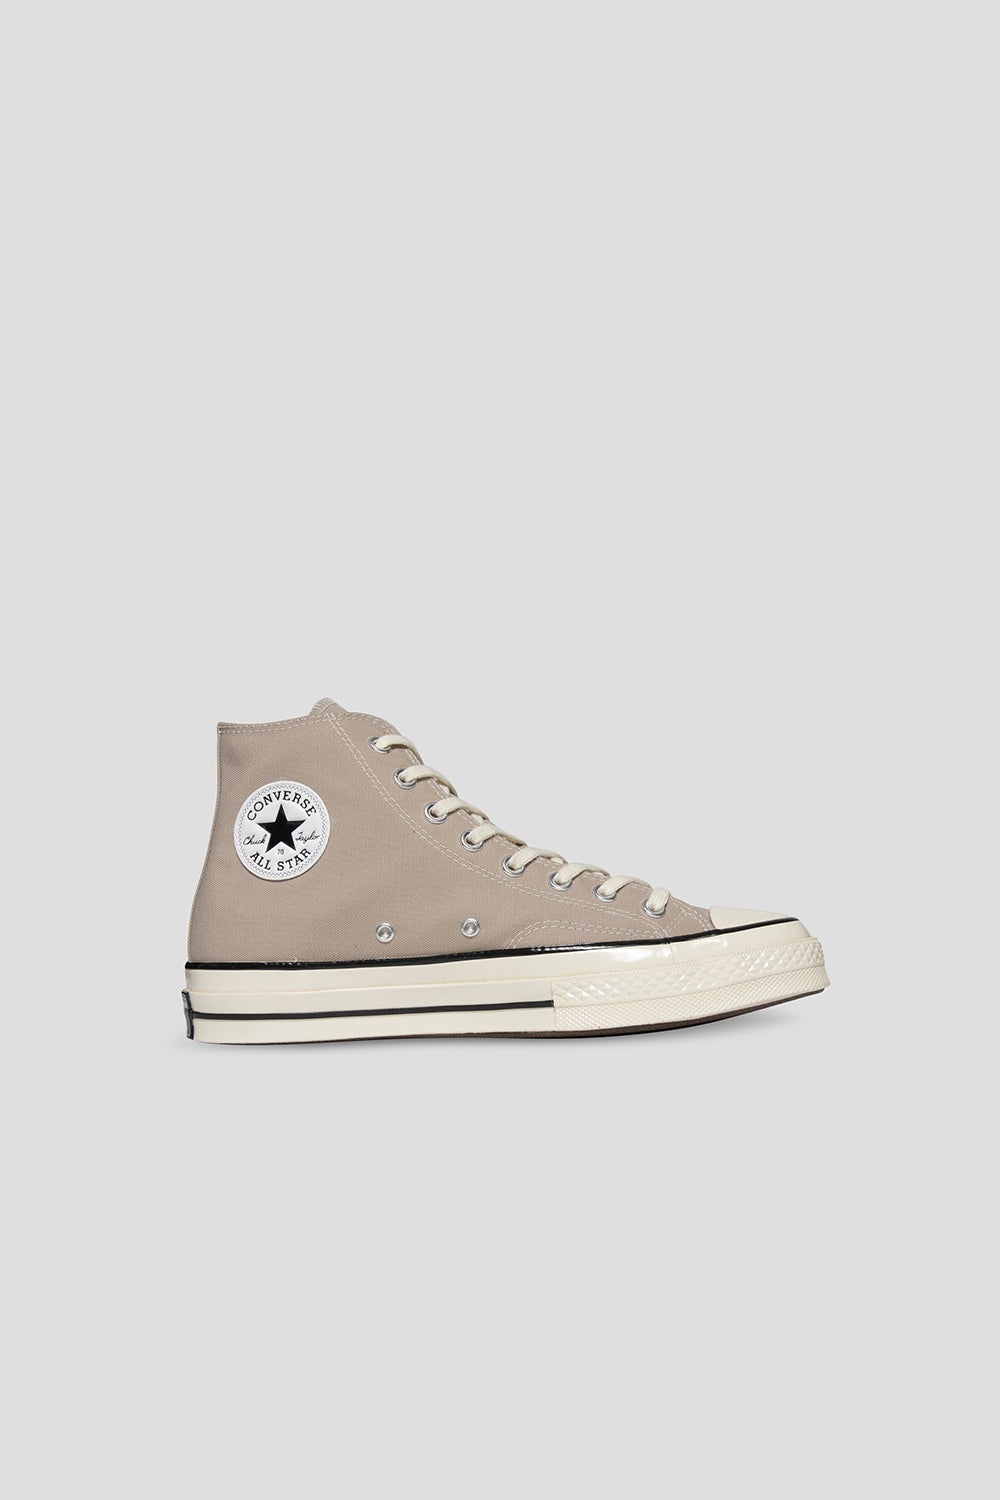 Converse Chuck 70 Recycled Canvas High Top Papyrus